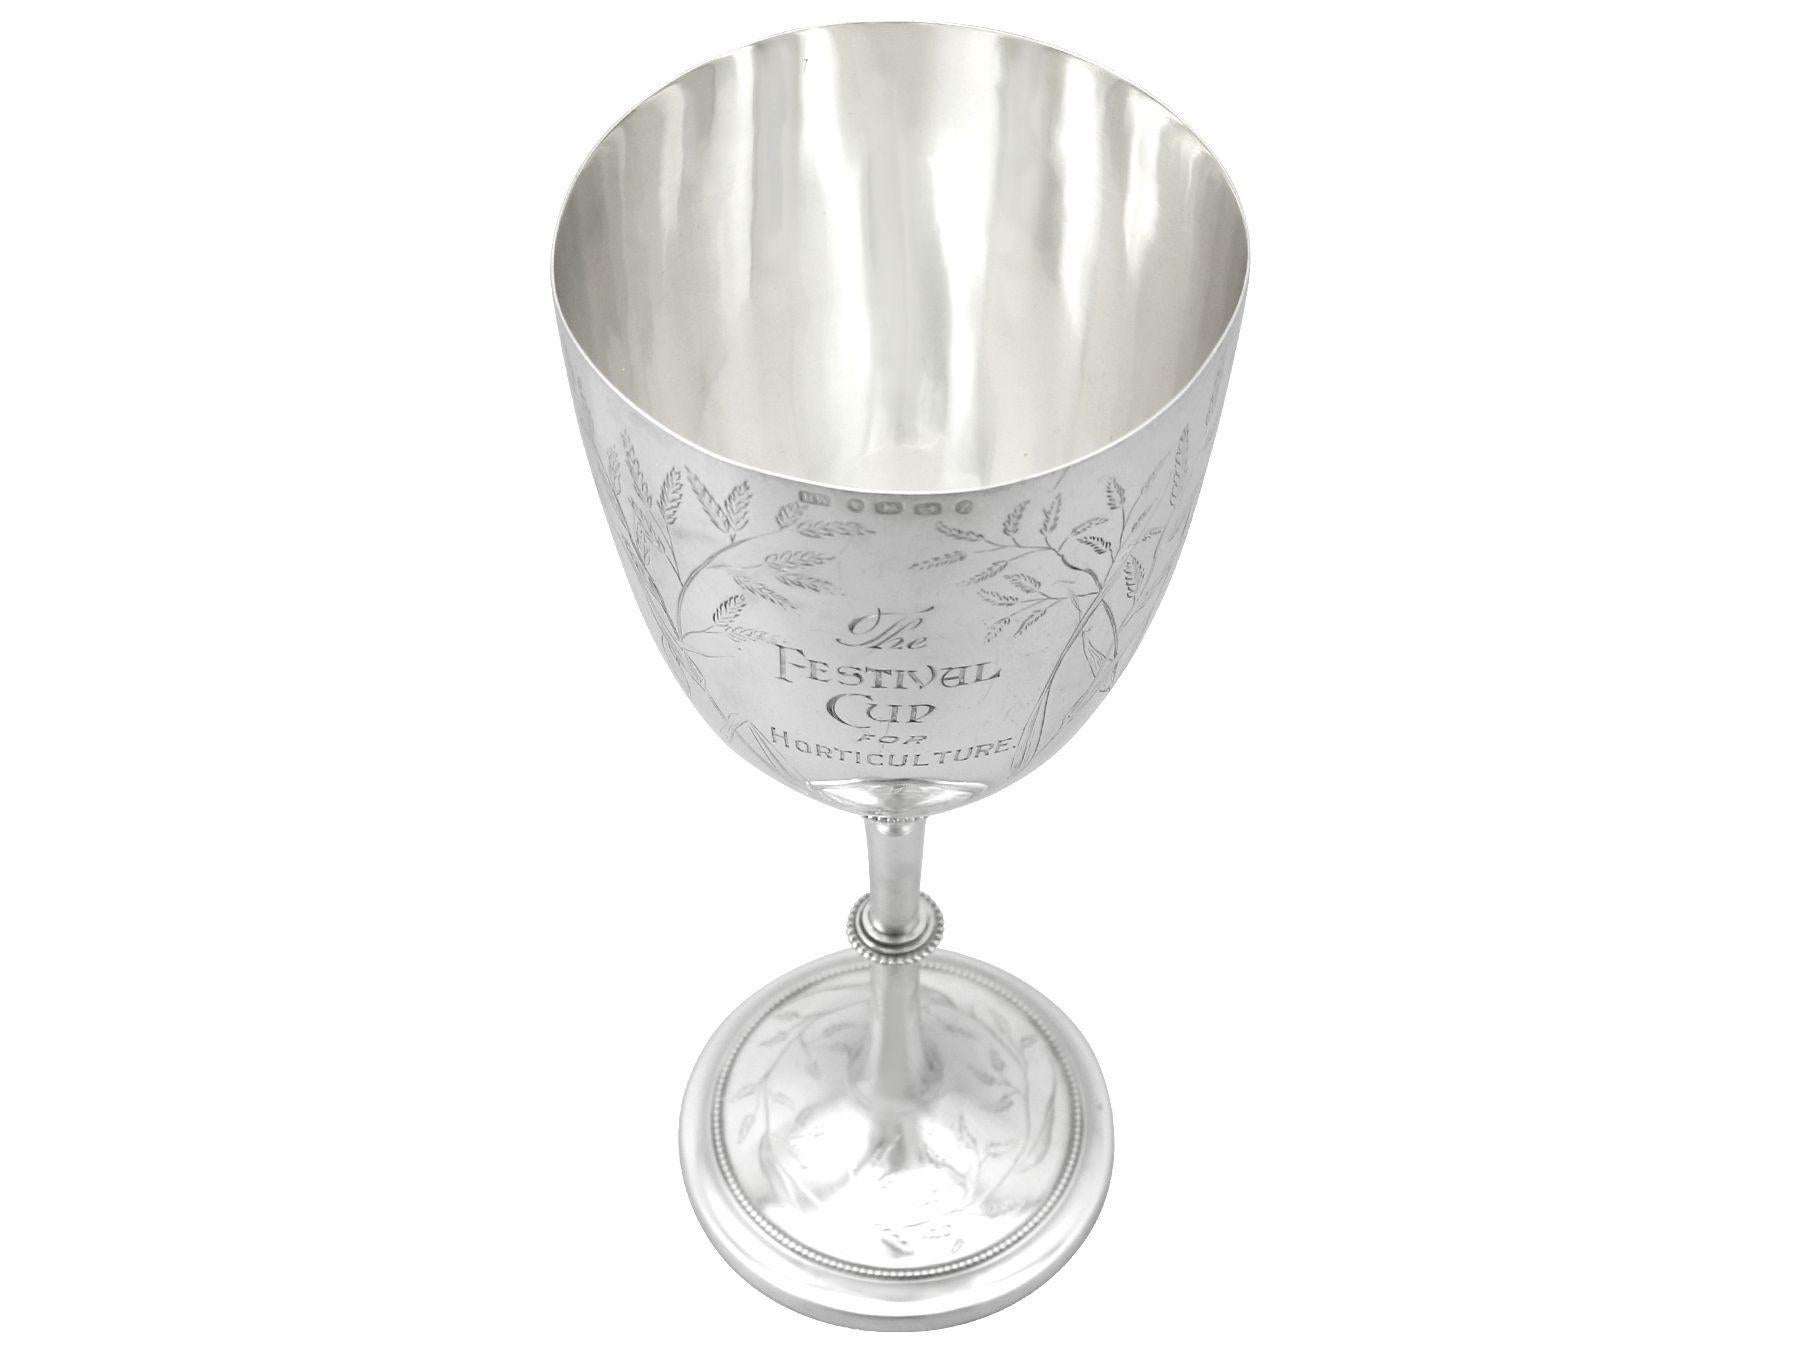 An exceptional, fine and impressive, rare antique Victorian English sterling silver presentation goblet/cup; an addition to our collection of presentation related silverware.

This exceptional antique sterling silver presentation goblet / cup has